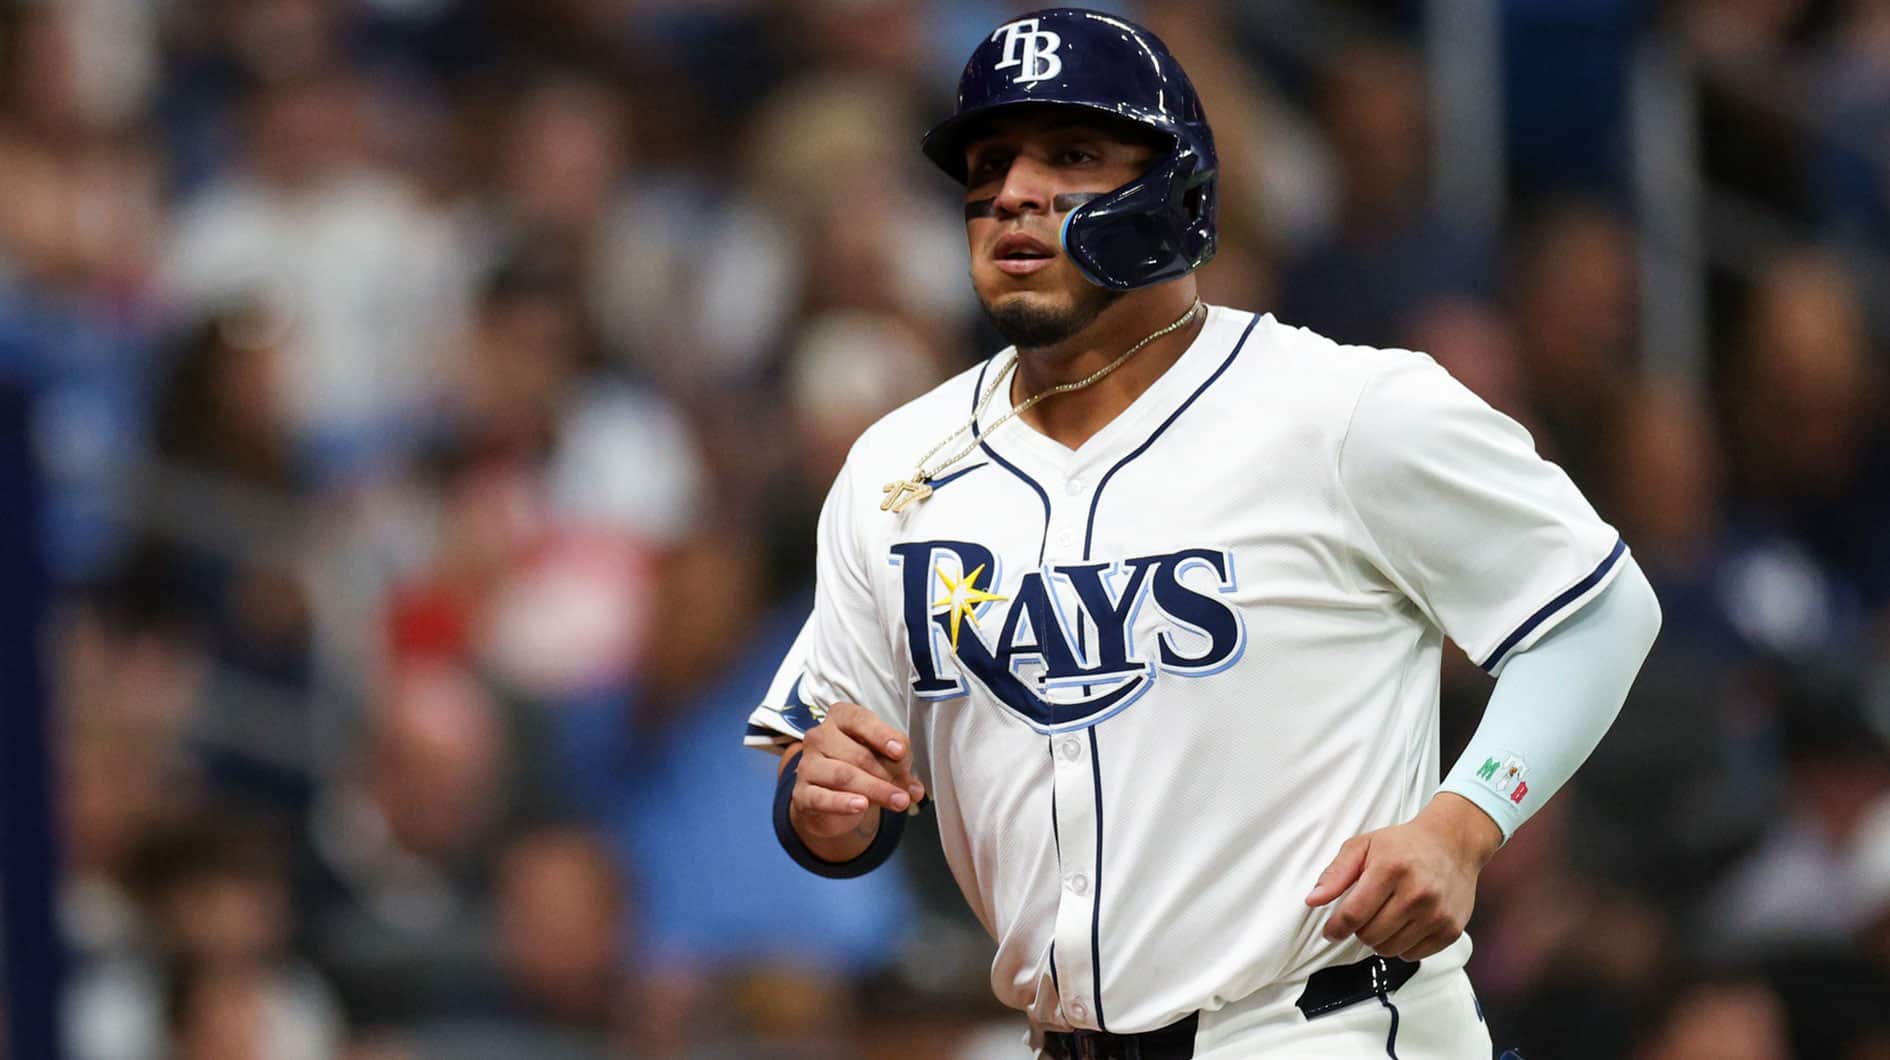 Tampa Bay Rays third baseman Isaac Paredes (17) scores a run against the New York Yankees in the third inning at Tropicana Field.